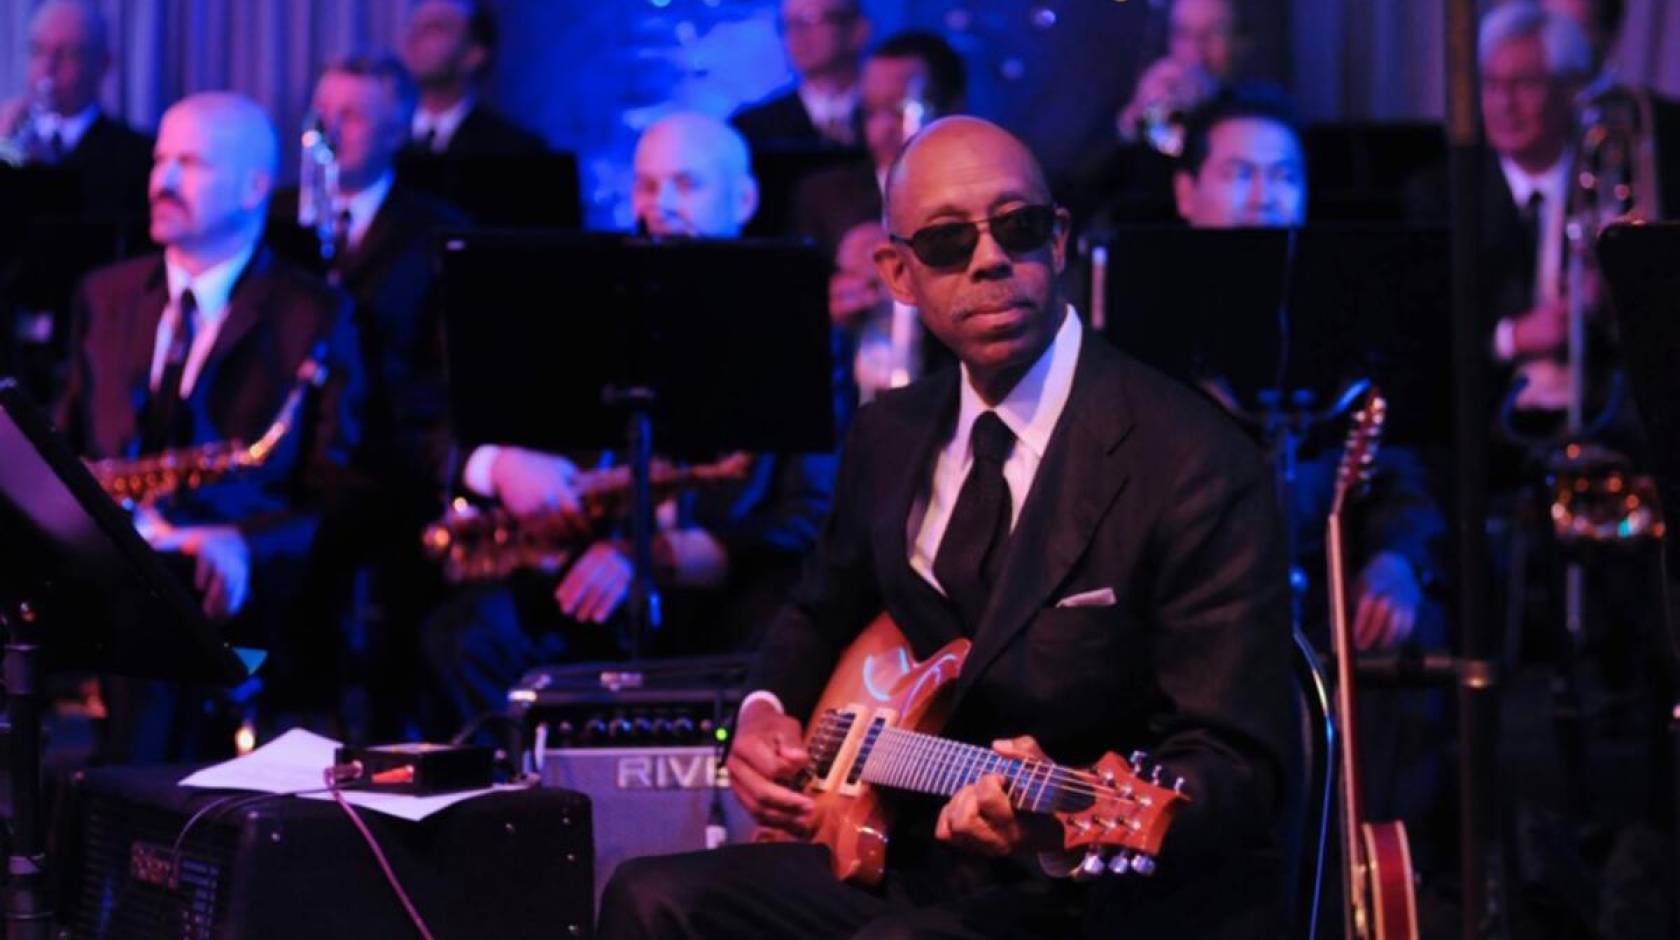 President Drake plays guitar on stage, wearing a black suit and sunglasses